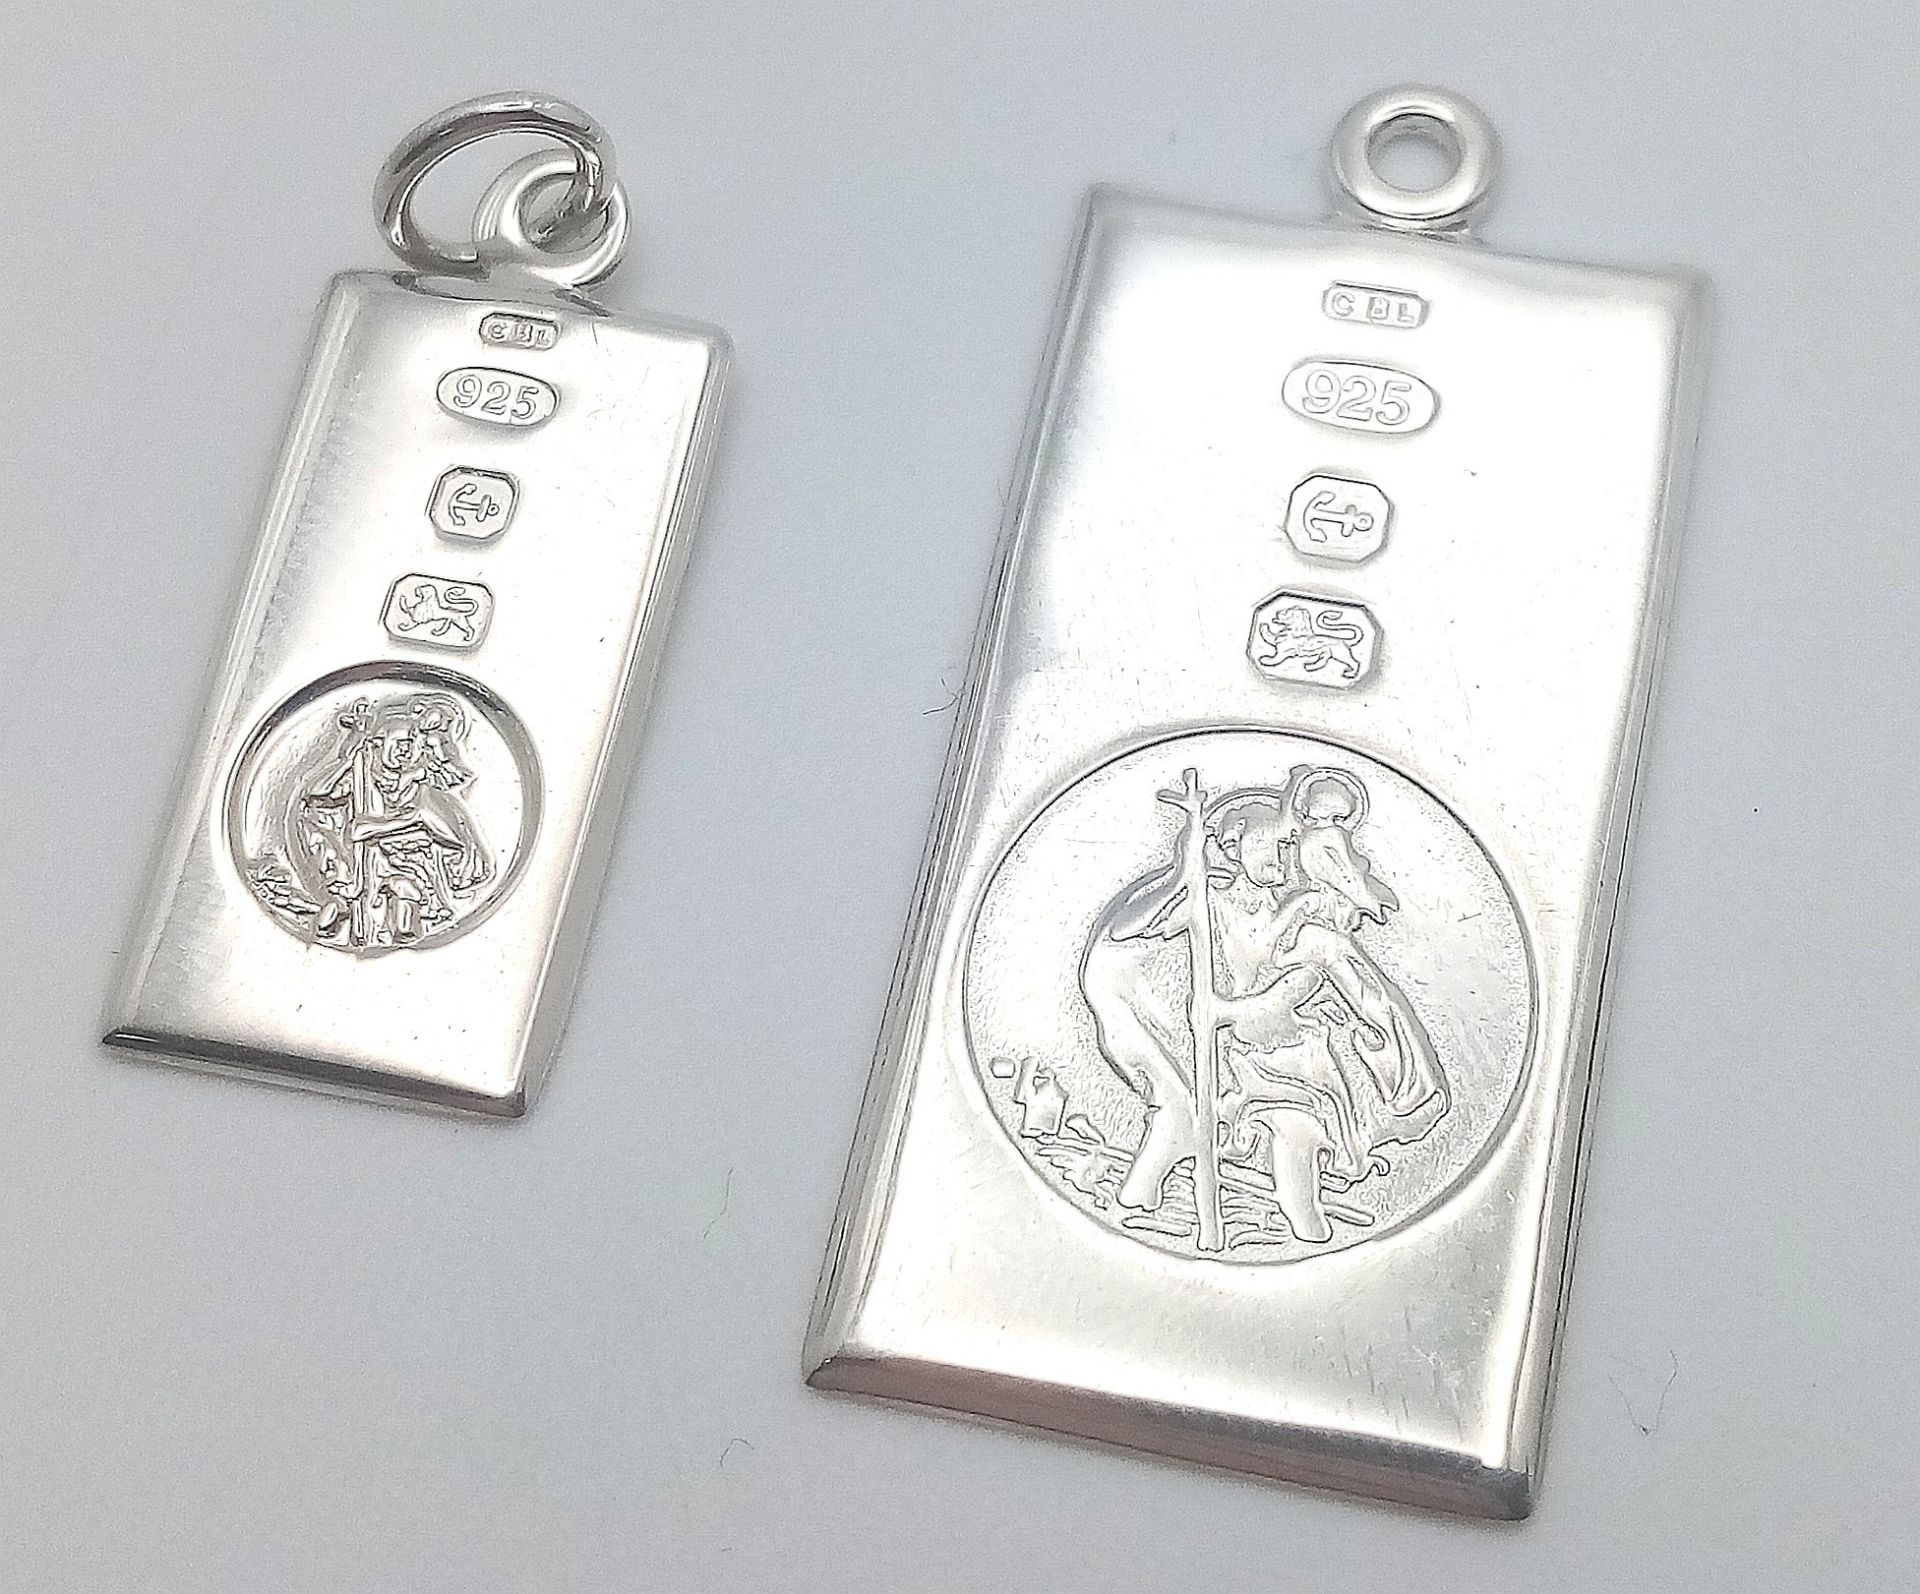 2 X STERLING SILVER RECTANGULAR ST CHRISTOPHERS. 2.8cm and 3.4cm length. 6.1g total weight. Ref: